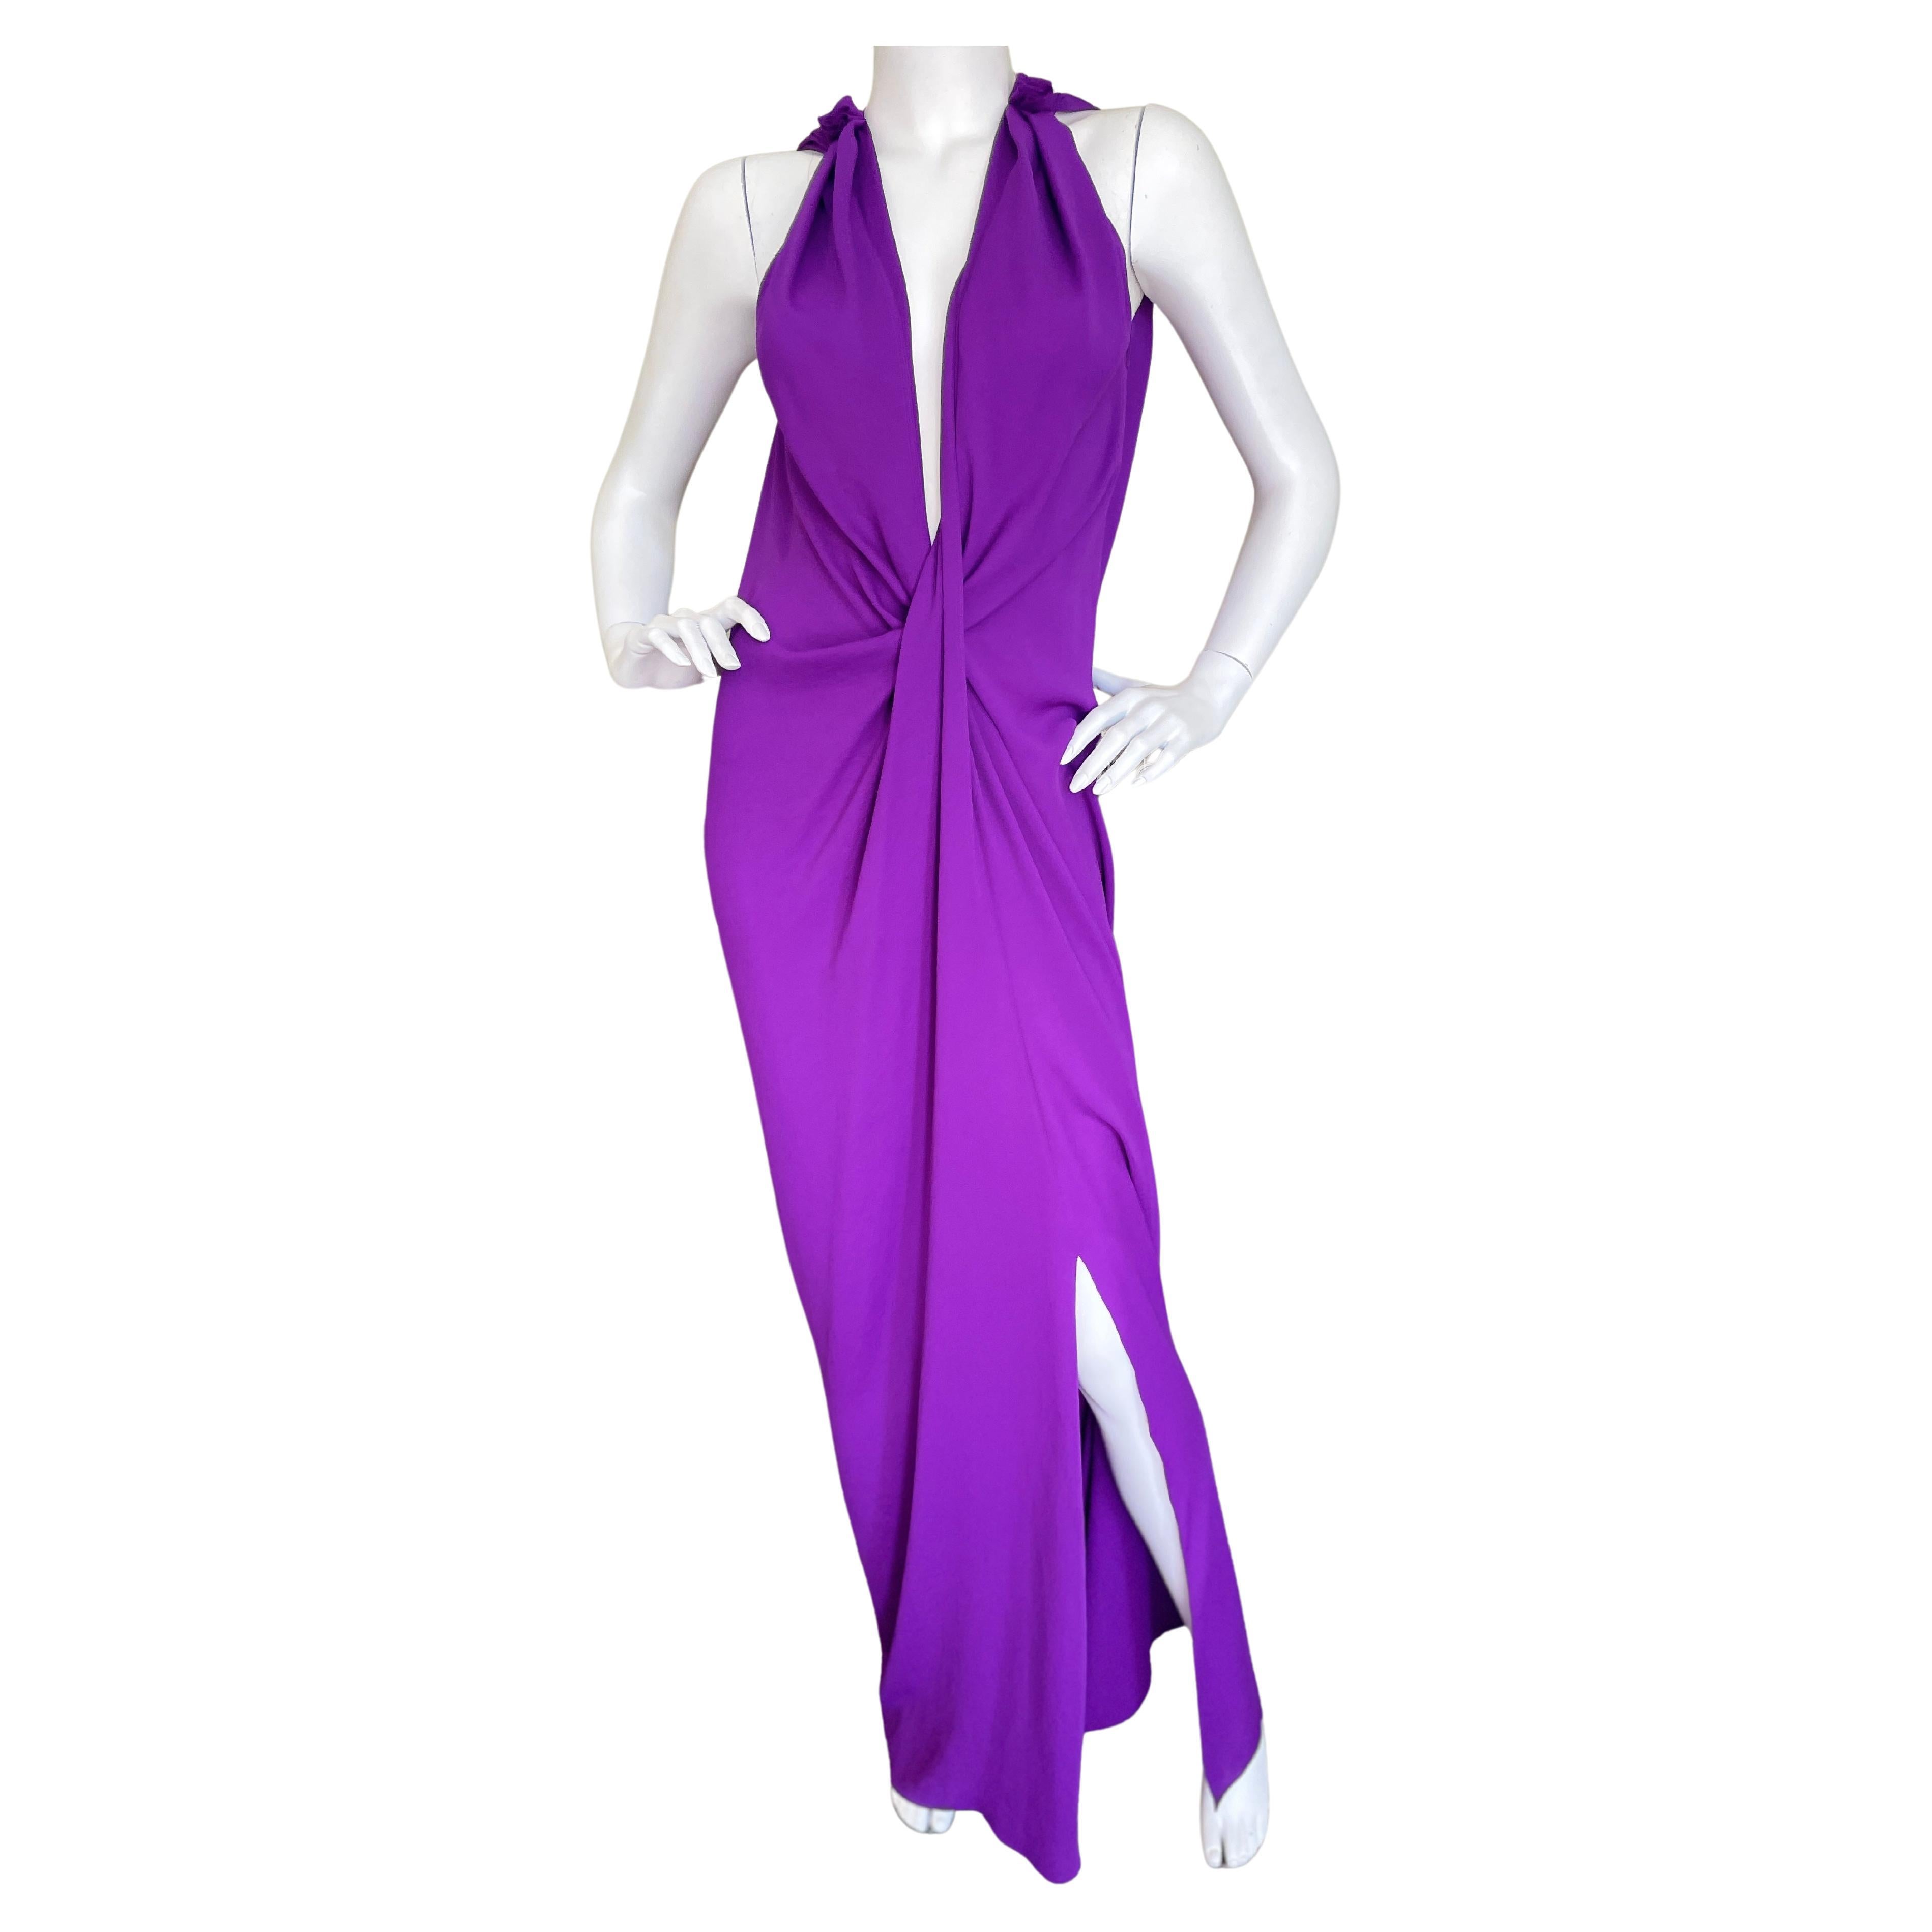  Lanvin by Alber Elbaz 2014 Plunging Purple Evening Dress with High Slit For Sale